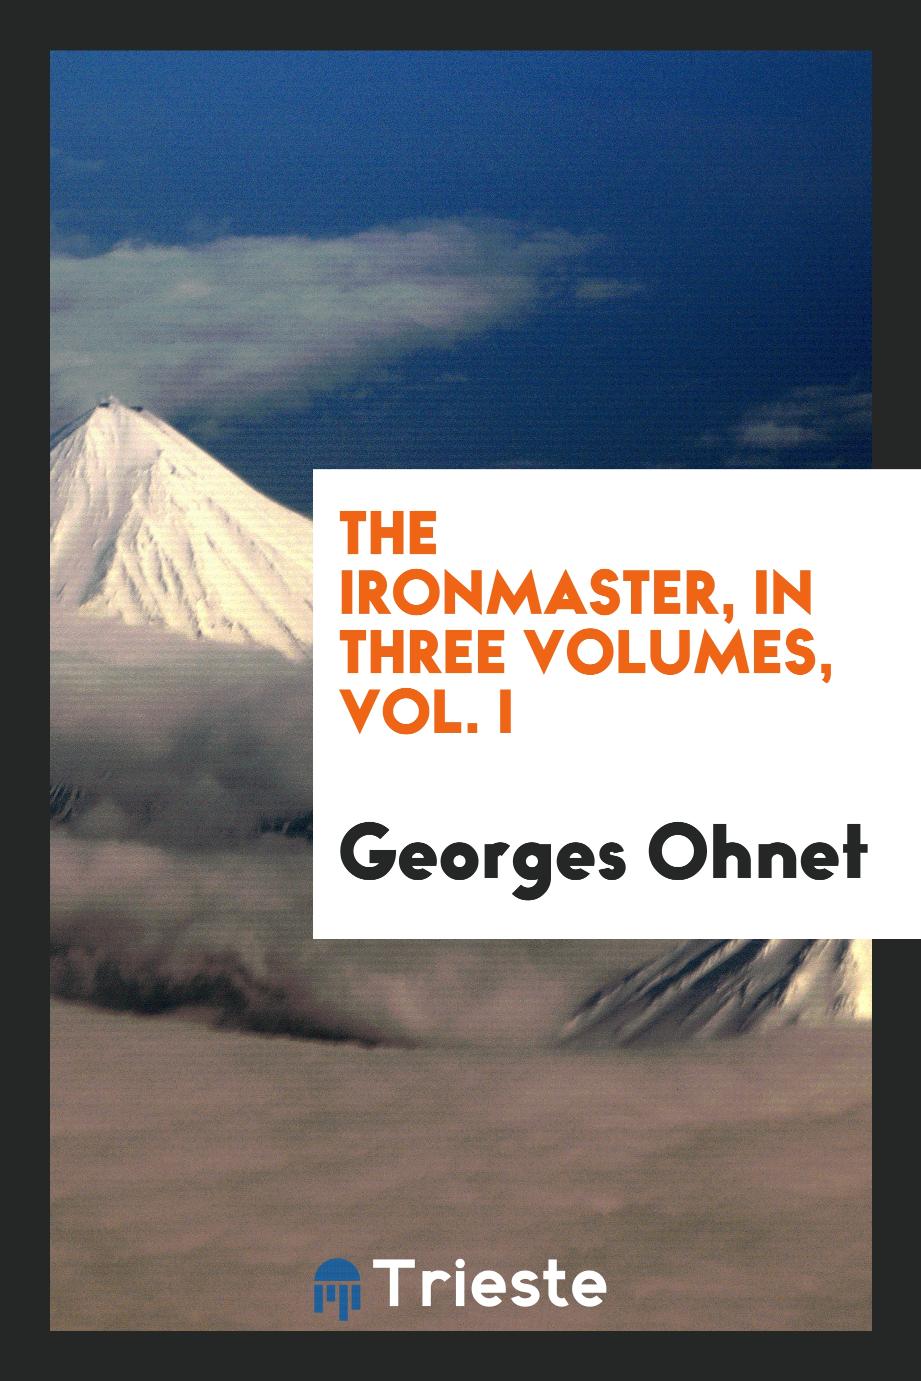 The ironmaster, In three Volumes, Vol. I